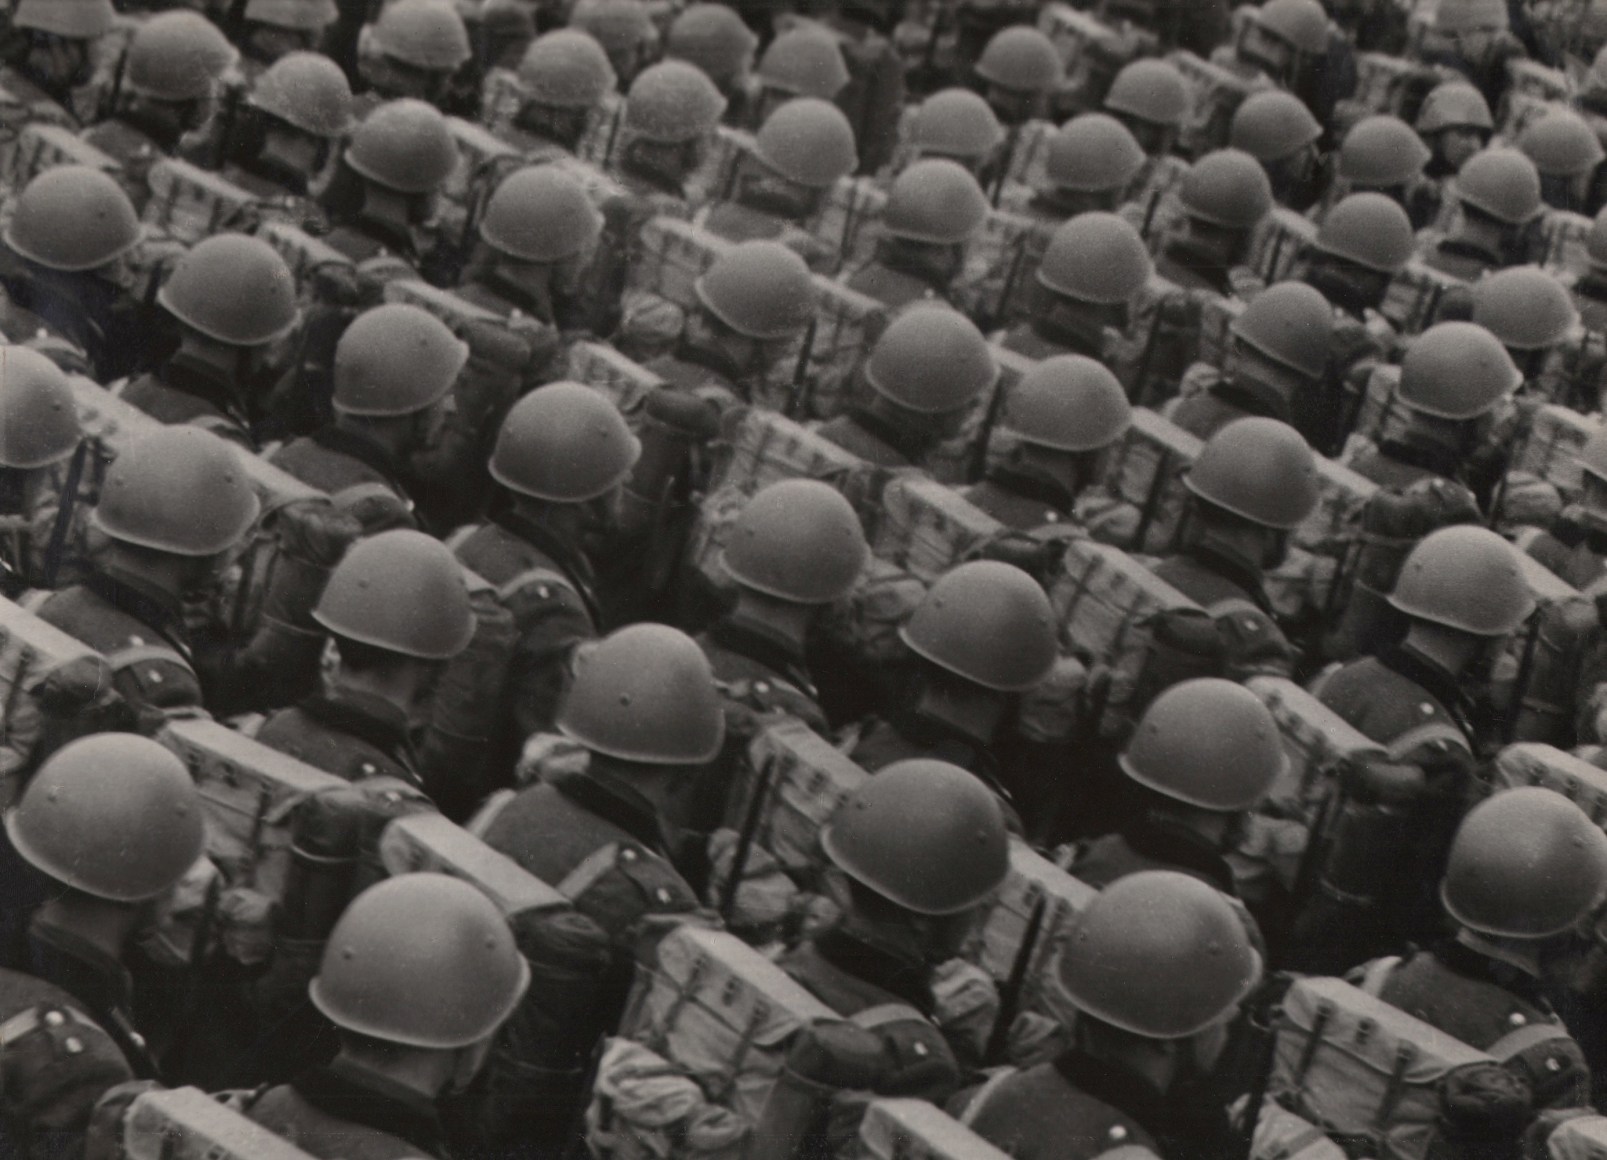 Italo Bertoglio, Le case di fronte, c. 1937. Diagonally composed rows of soldiers in helmets photographed from behind.